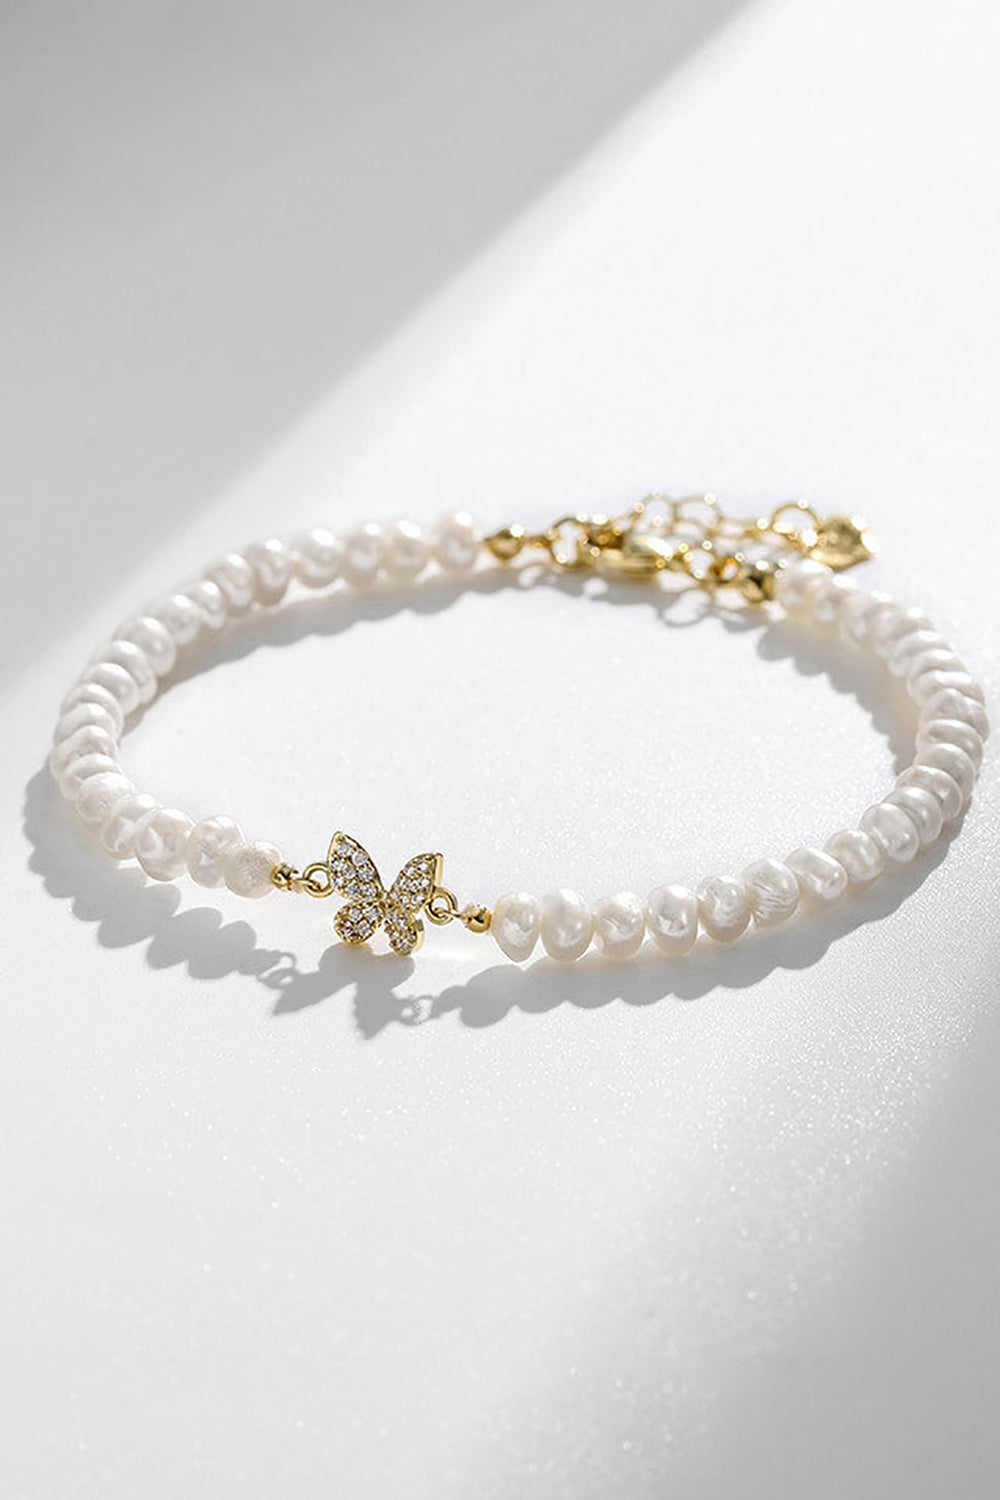 White Cultured Freshwater Full Pearl Bracelet with Rhinestone Butterfly